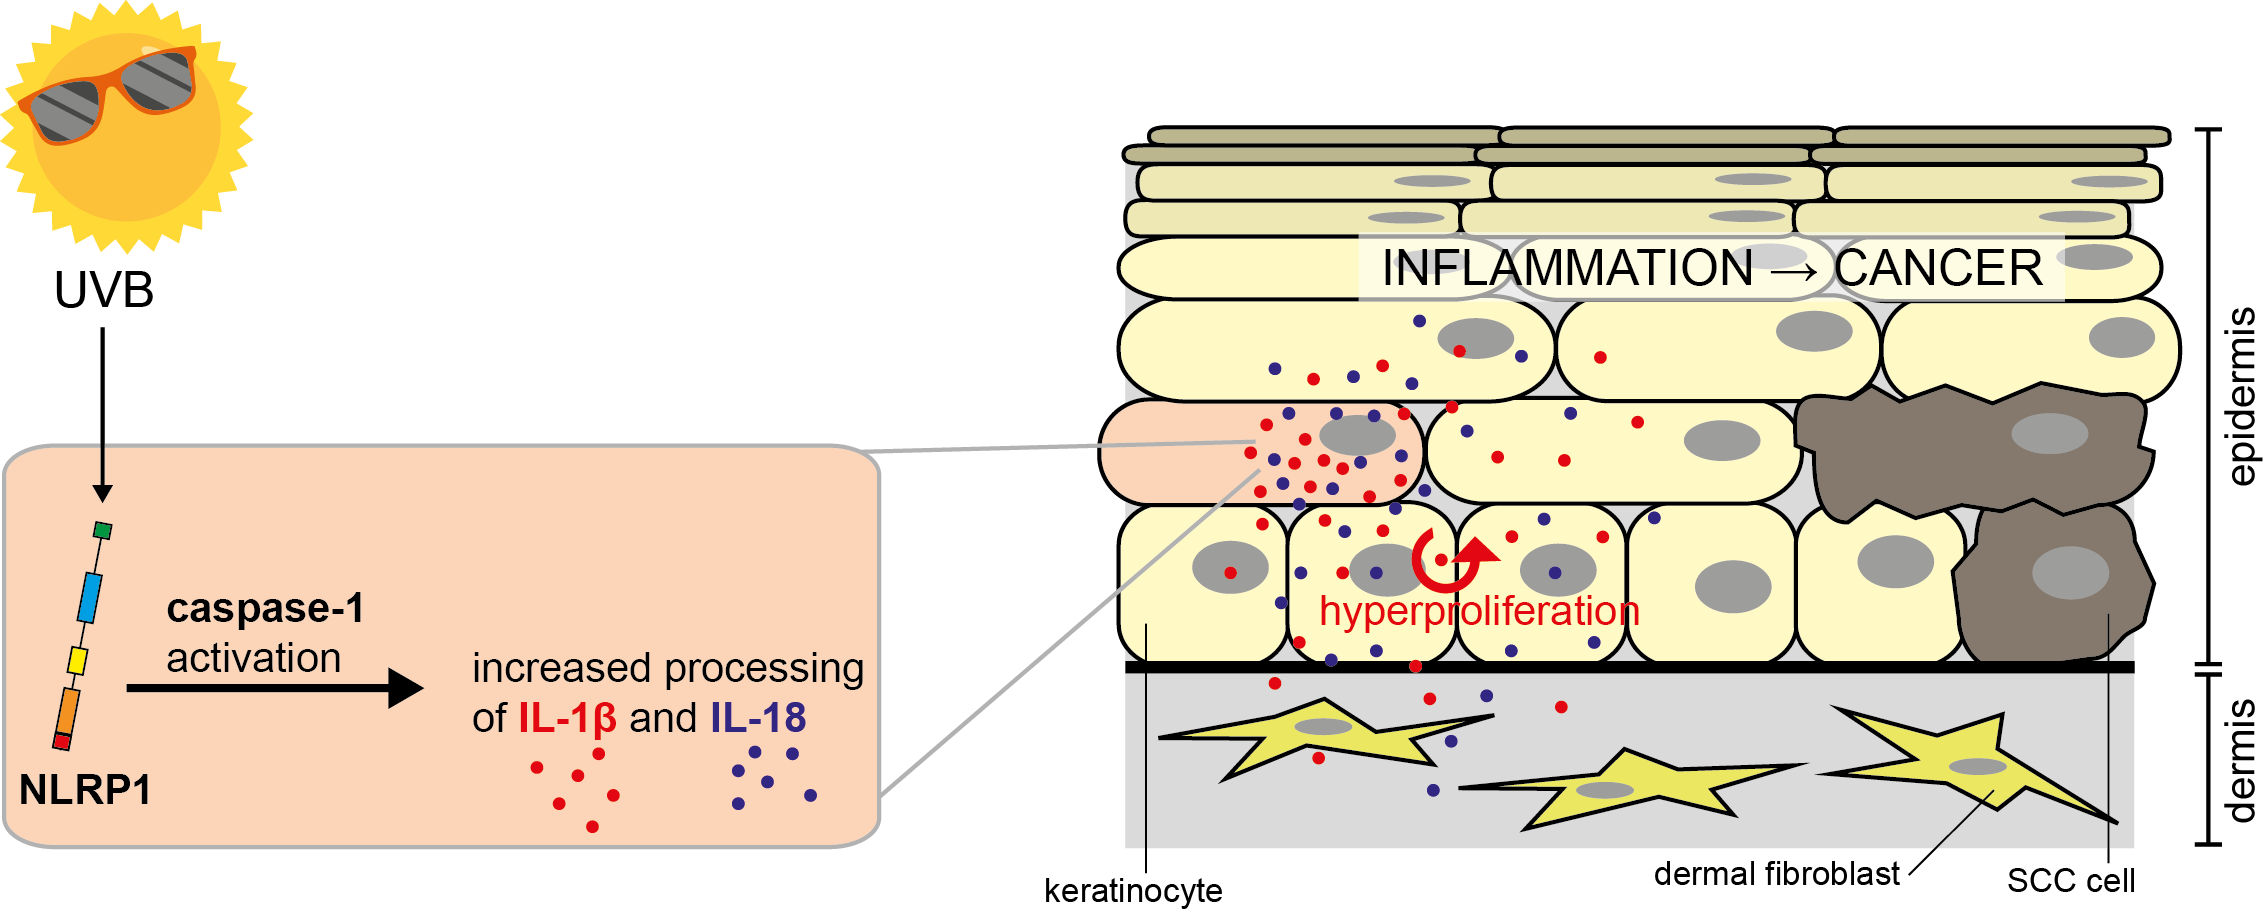 UVB irradiation activates NLRP1 in keratinocytes, which results in secretion of the proinflammatory cytokines IL-1α and -18. This causes inflammation in the skin and hyperproliferation of keratinocytes, which may result in skin cancer development.